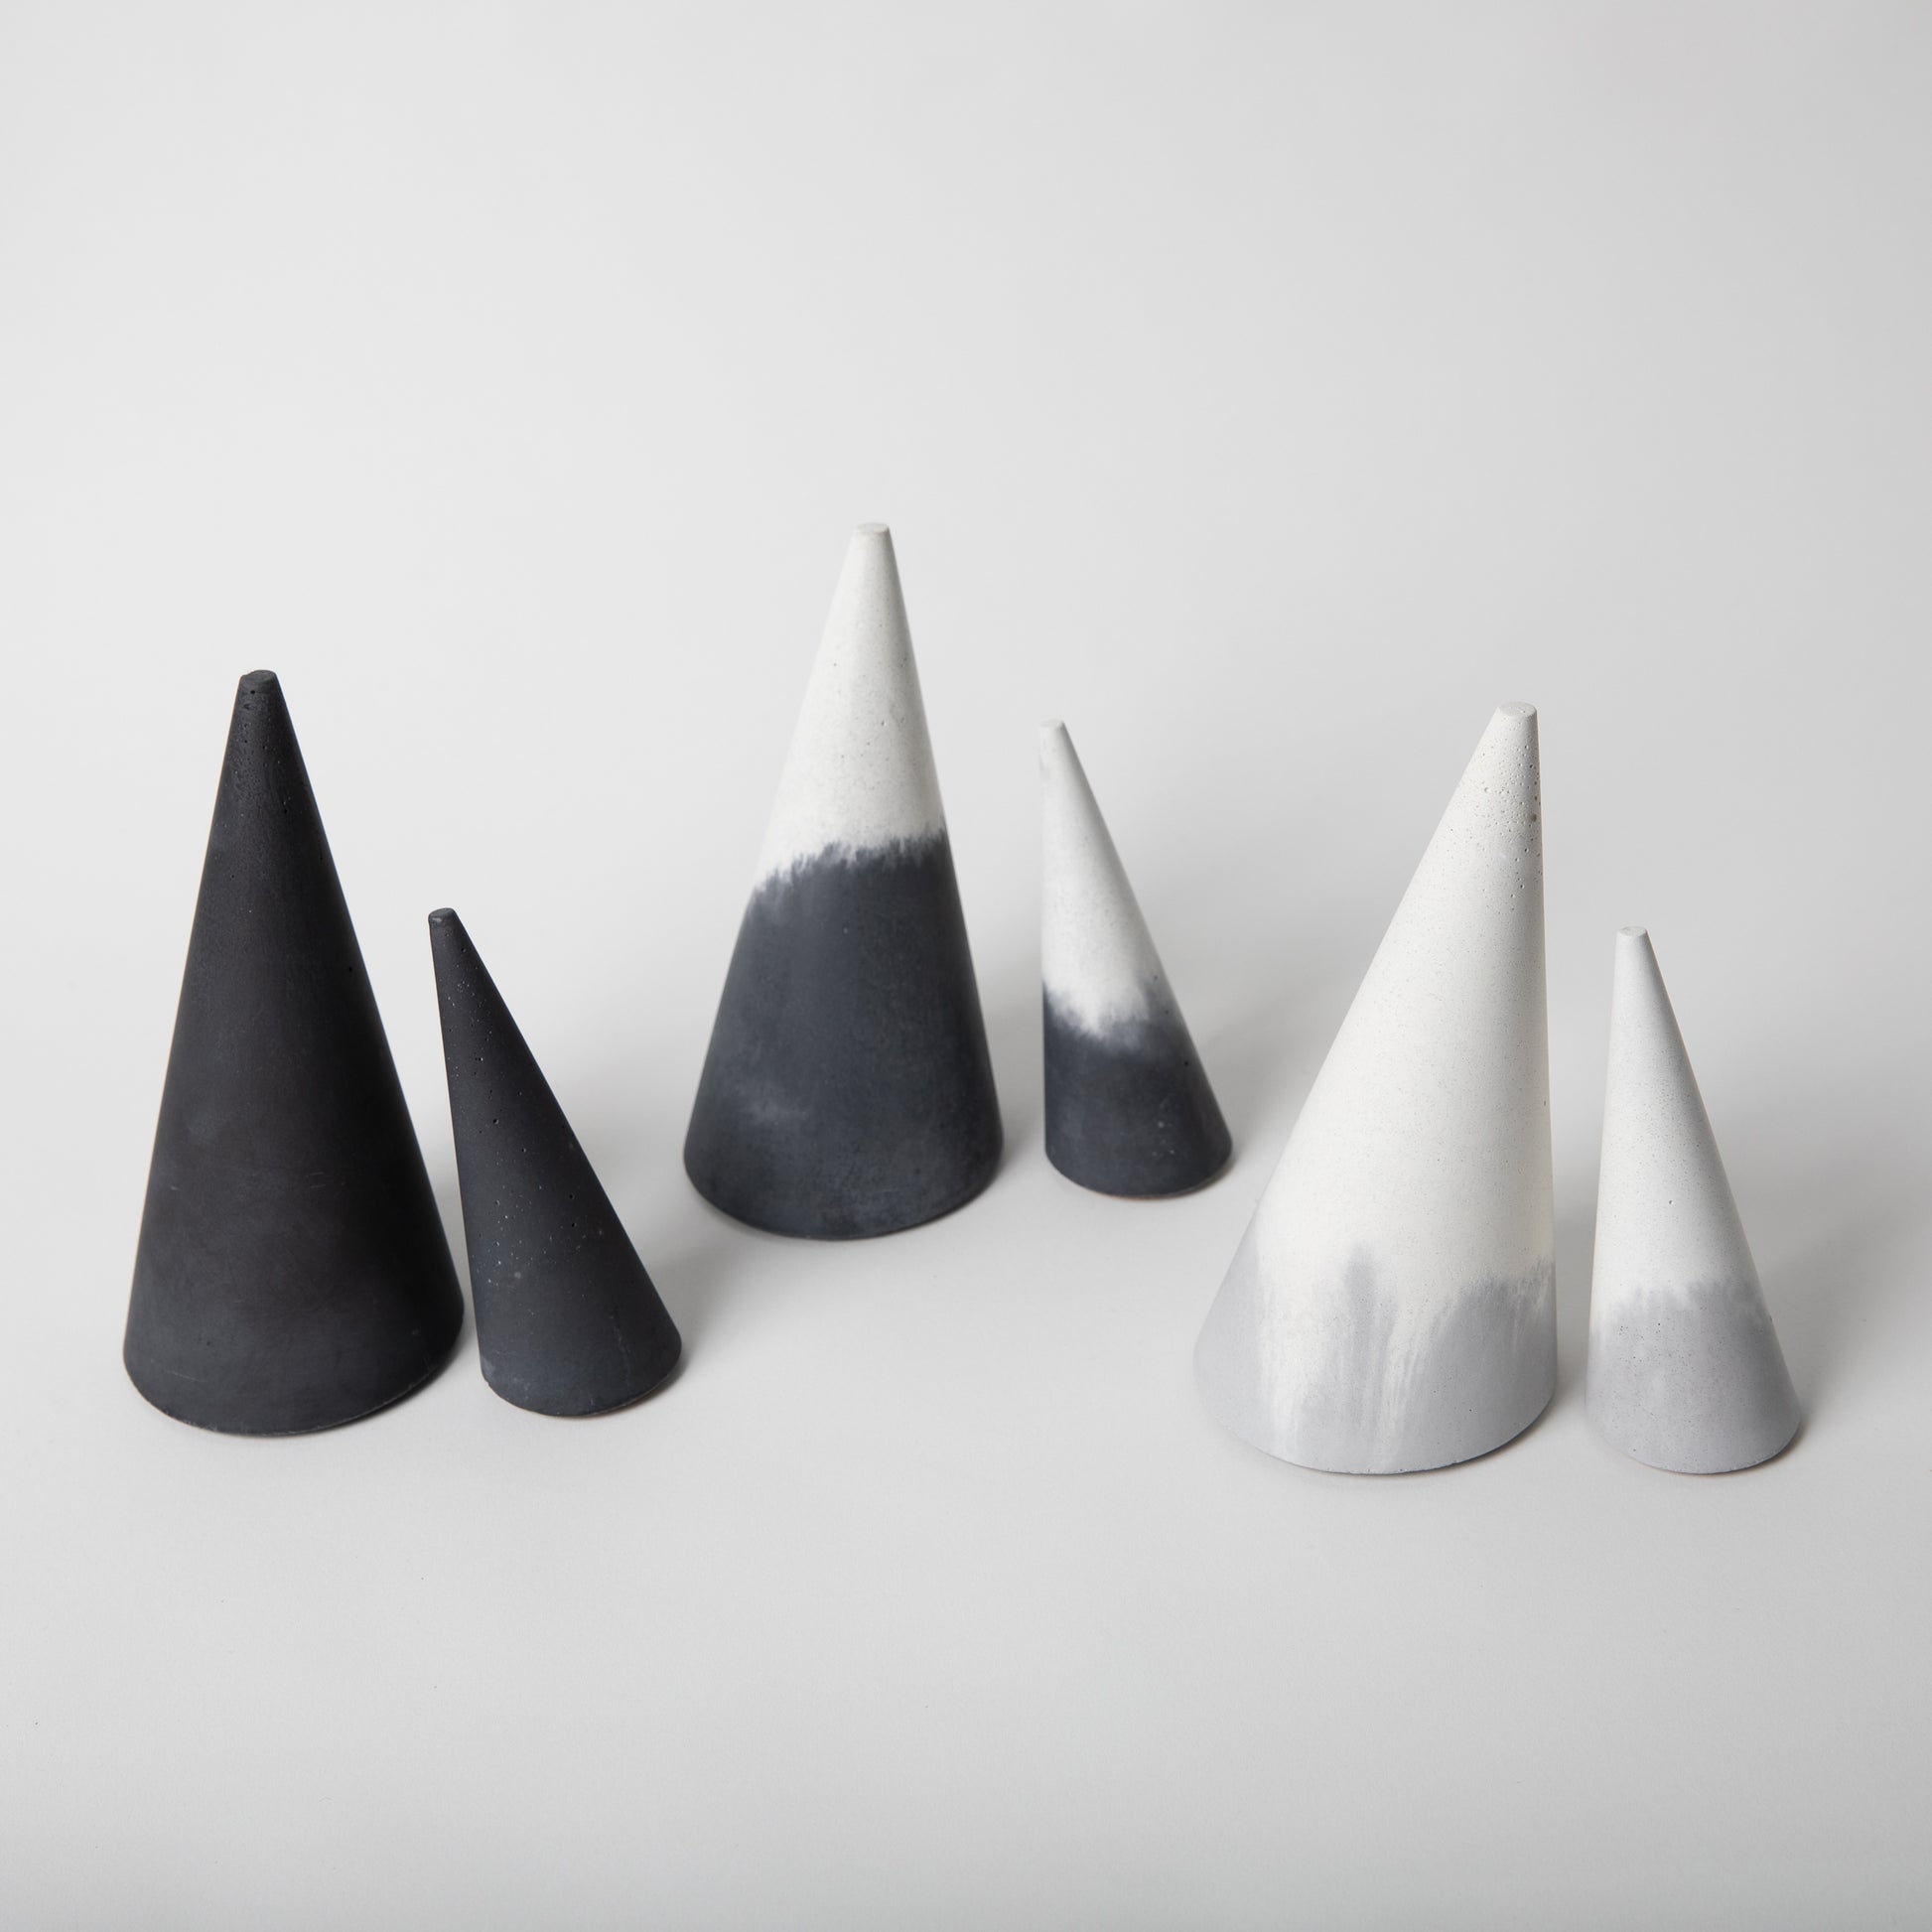 Cone shaped concrete jewelry holder with cork base in various colors.